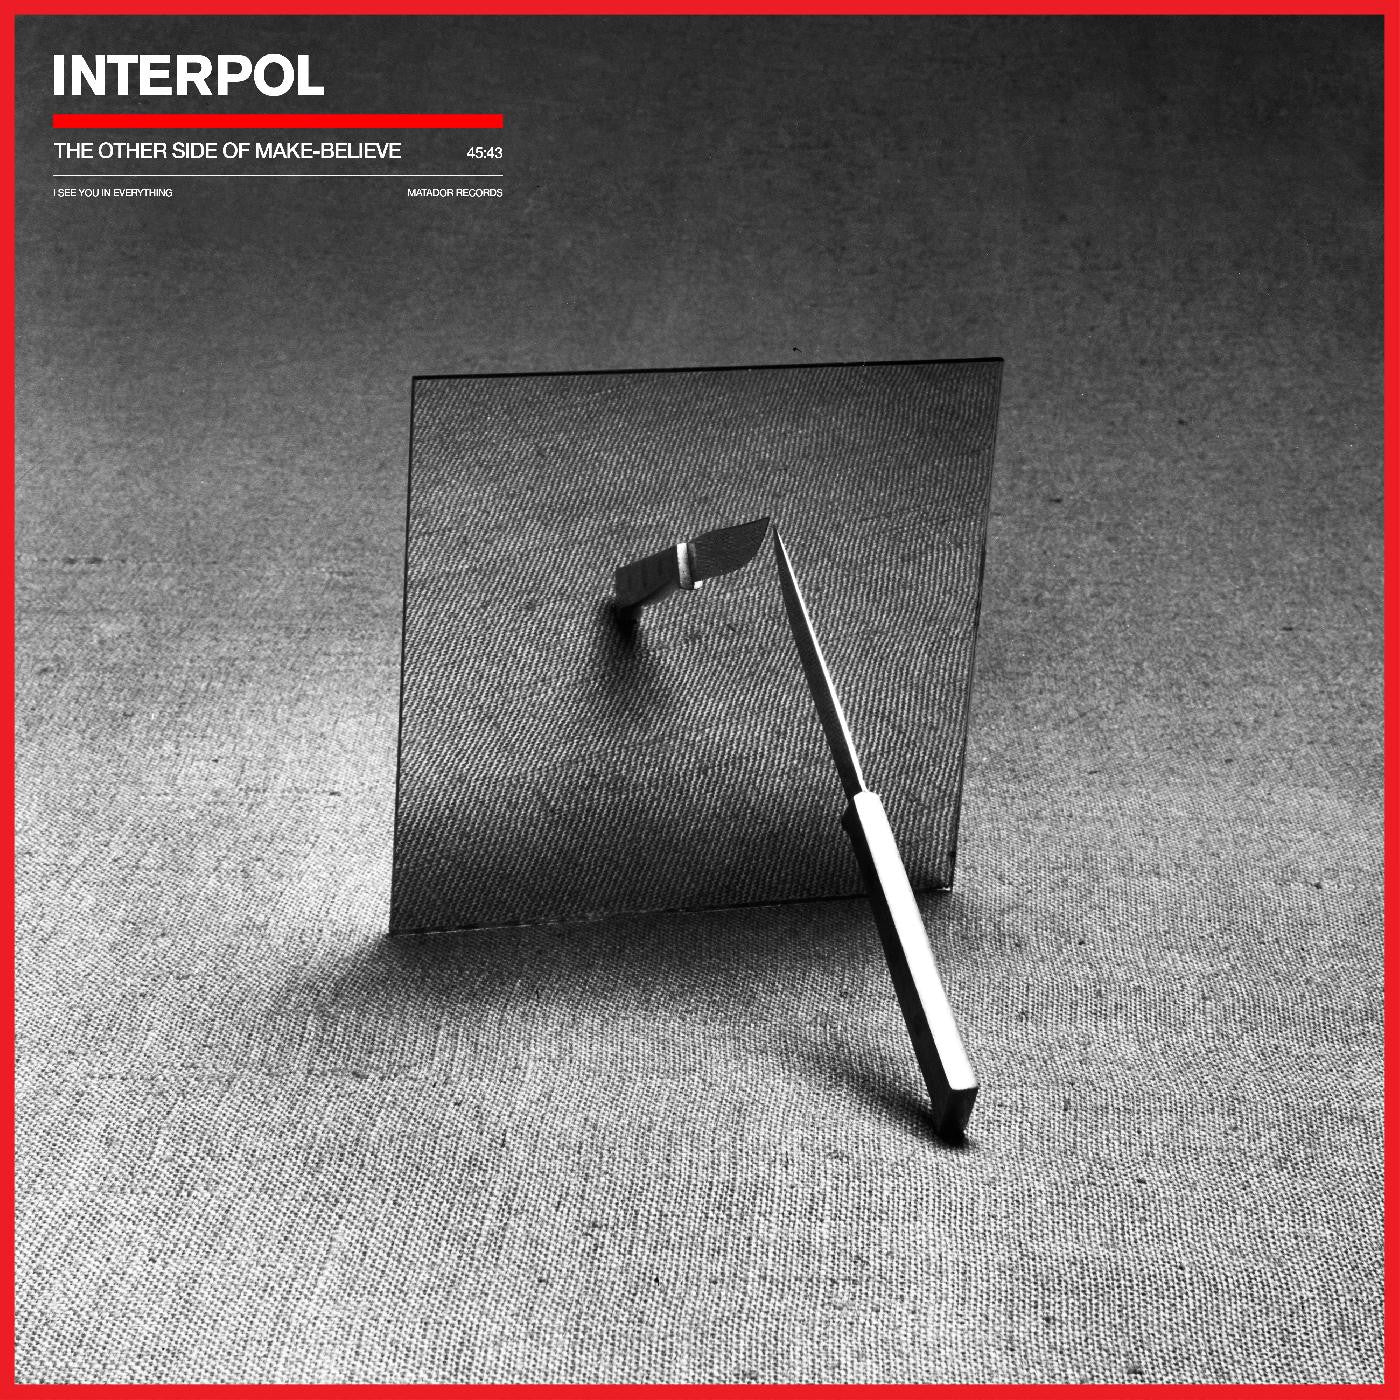 Interpol - The Other Side Of Make-Believe - 191401187510 - LP's - Yellow Racket Records